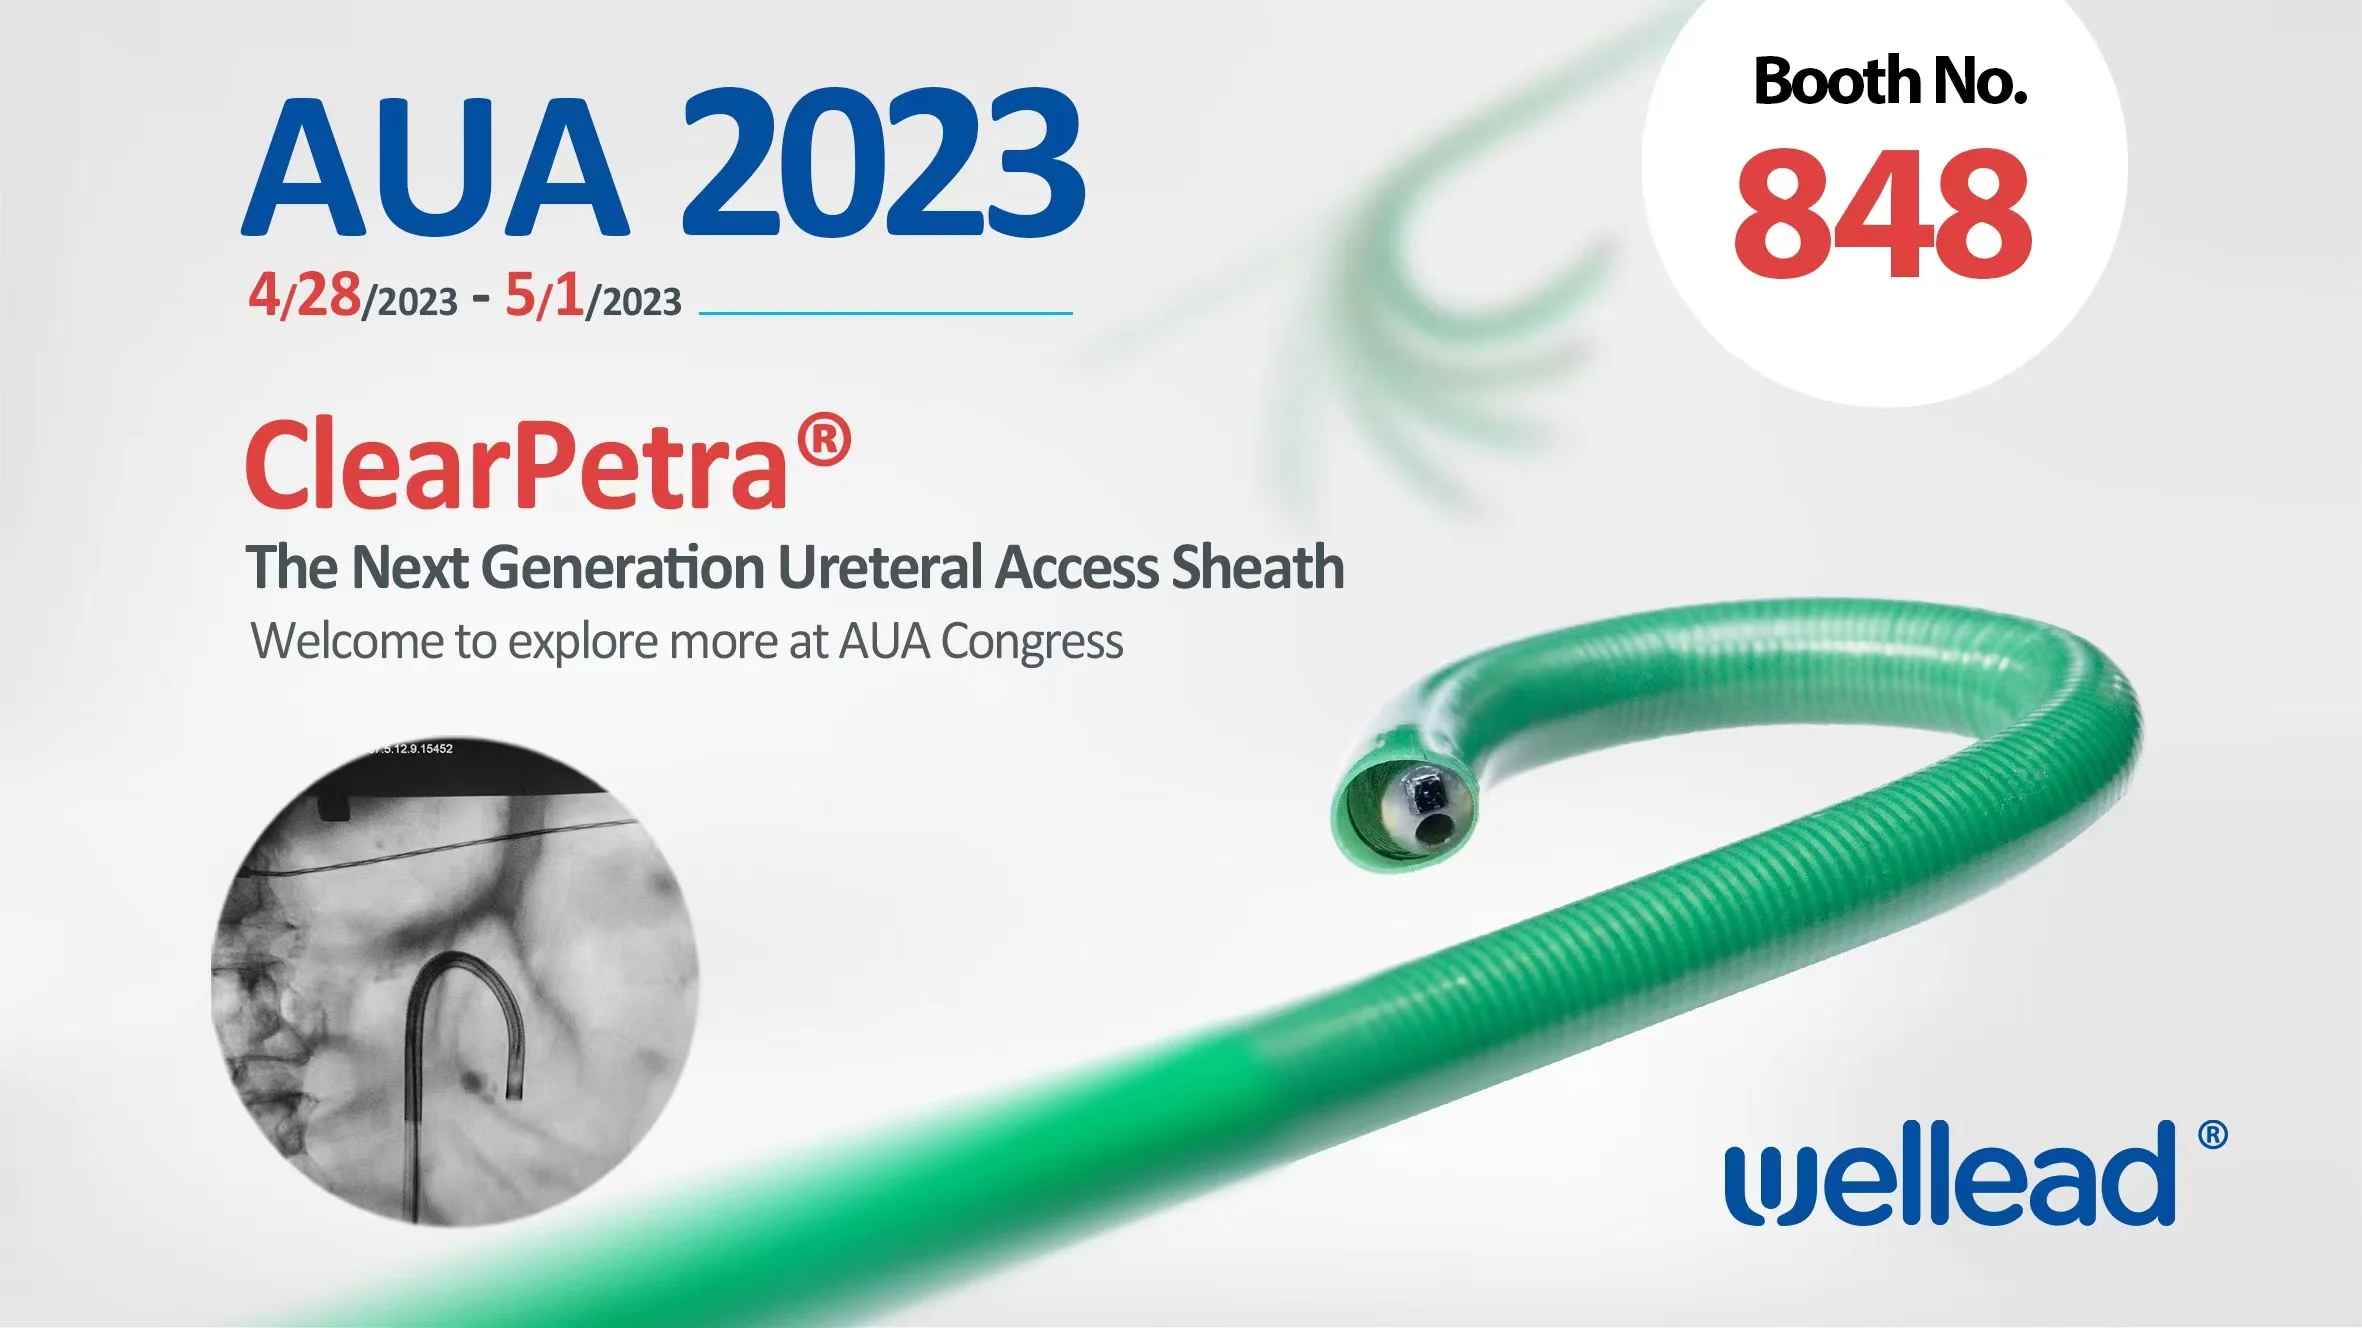 Join Well Lead at AUA 2023 – ClearPetra The Next Generation Ureteral Access Sheath